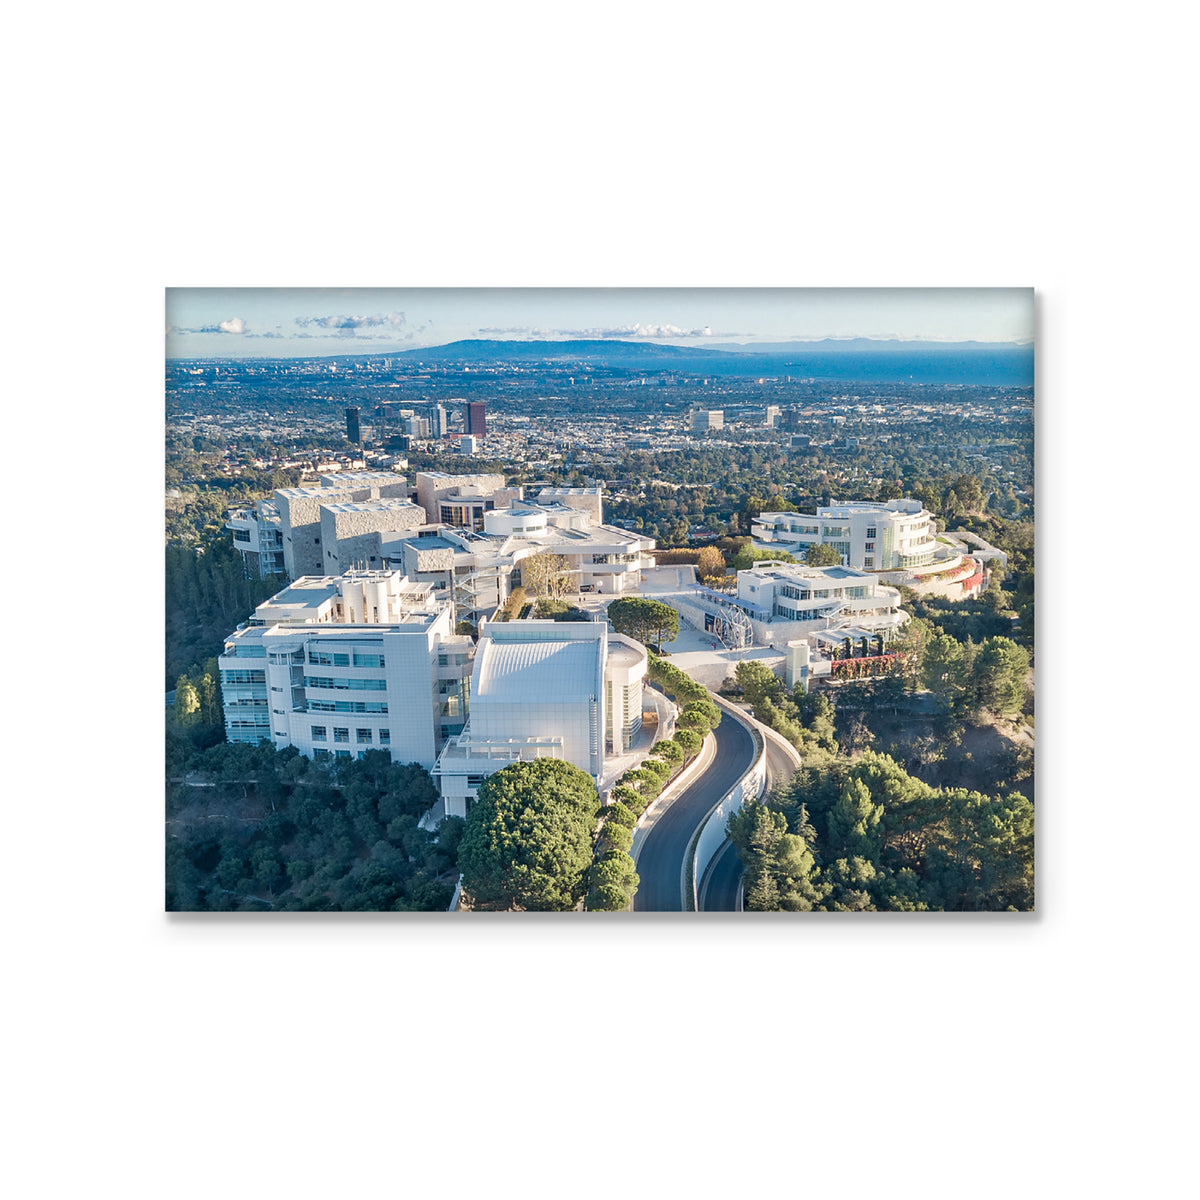 Magnet- Getty Center Aerial View | Getty Store